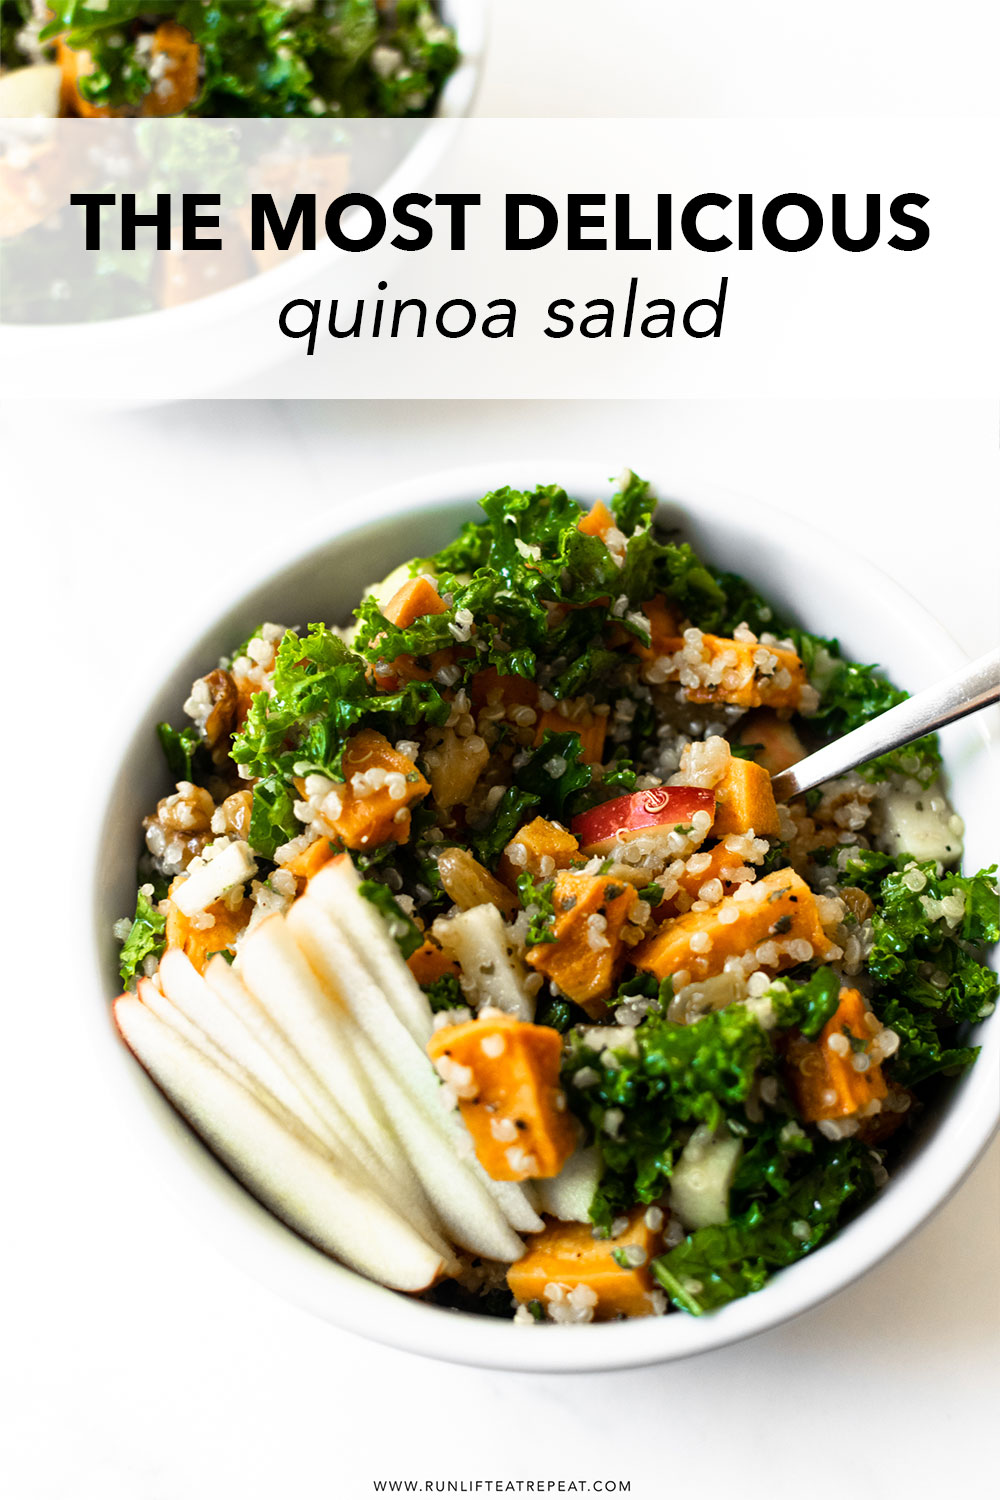 This flavorful sweet potato apple kale and quinoa salad proves that salads don't have to be bland. Loaded with flavor from fresh ingredients – it makes for a satisfying lunch or quick dinner!